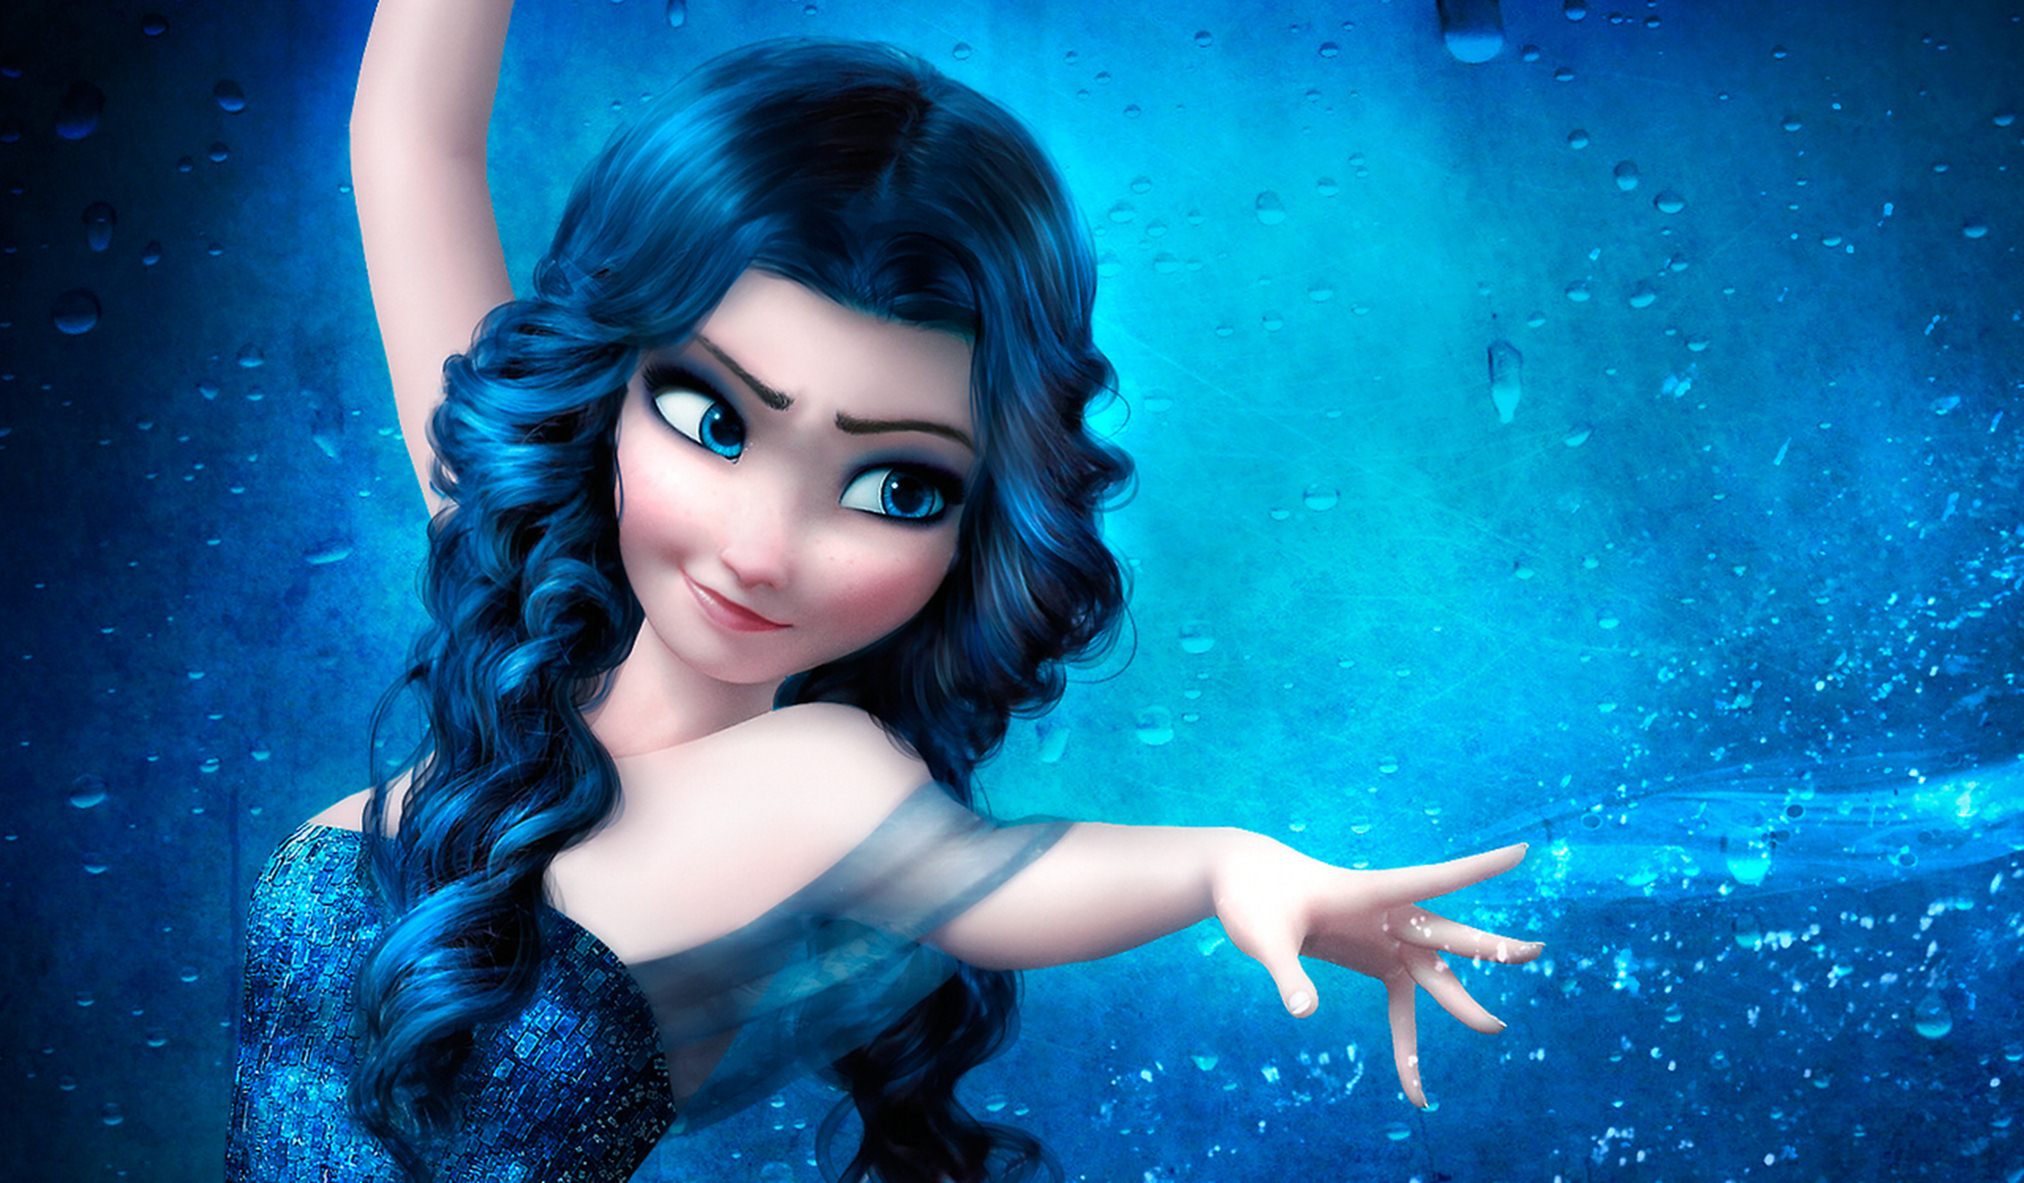 High Resolution Frozen Wallpapers Photos for PC & Mac, Tablet ...